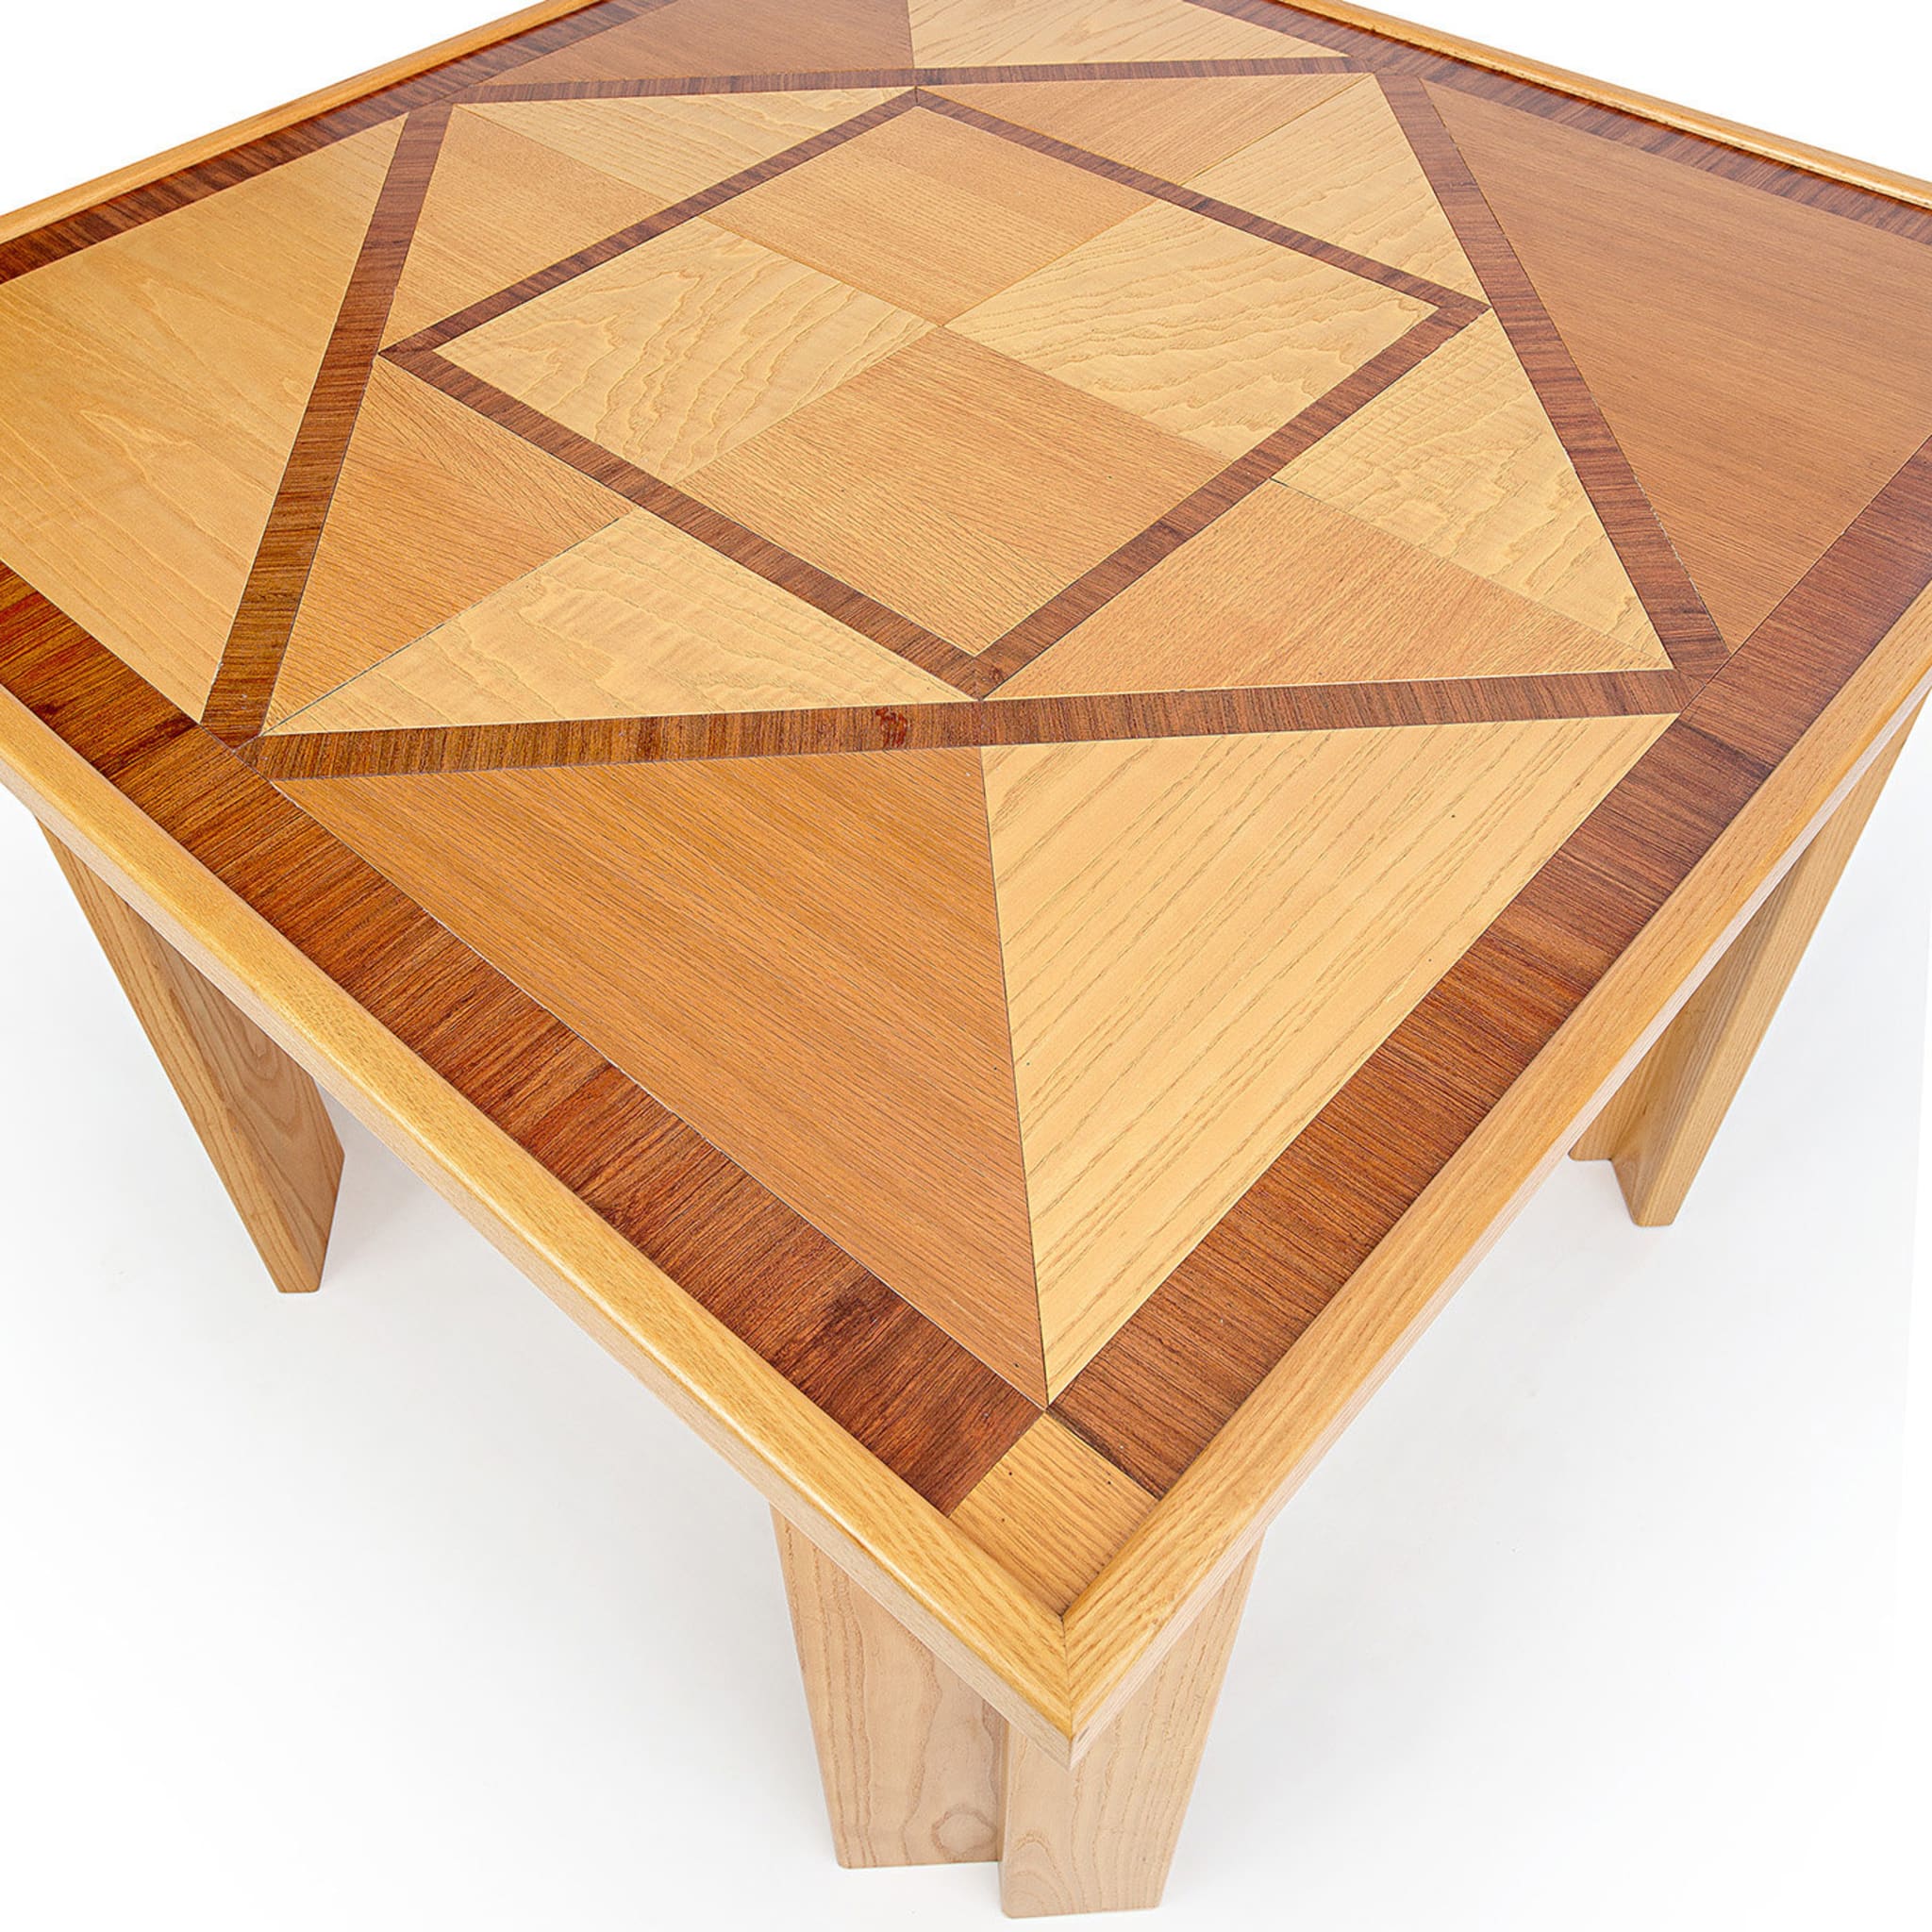 Wood Dining Table with Geometric Inlay - Alternative view 1